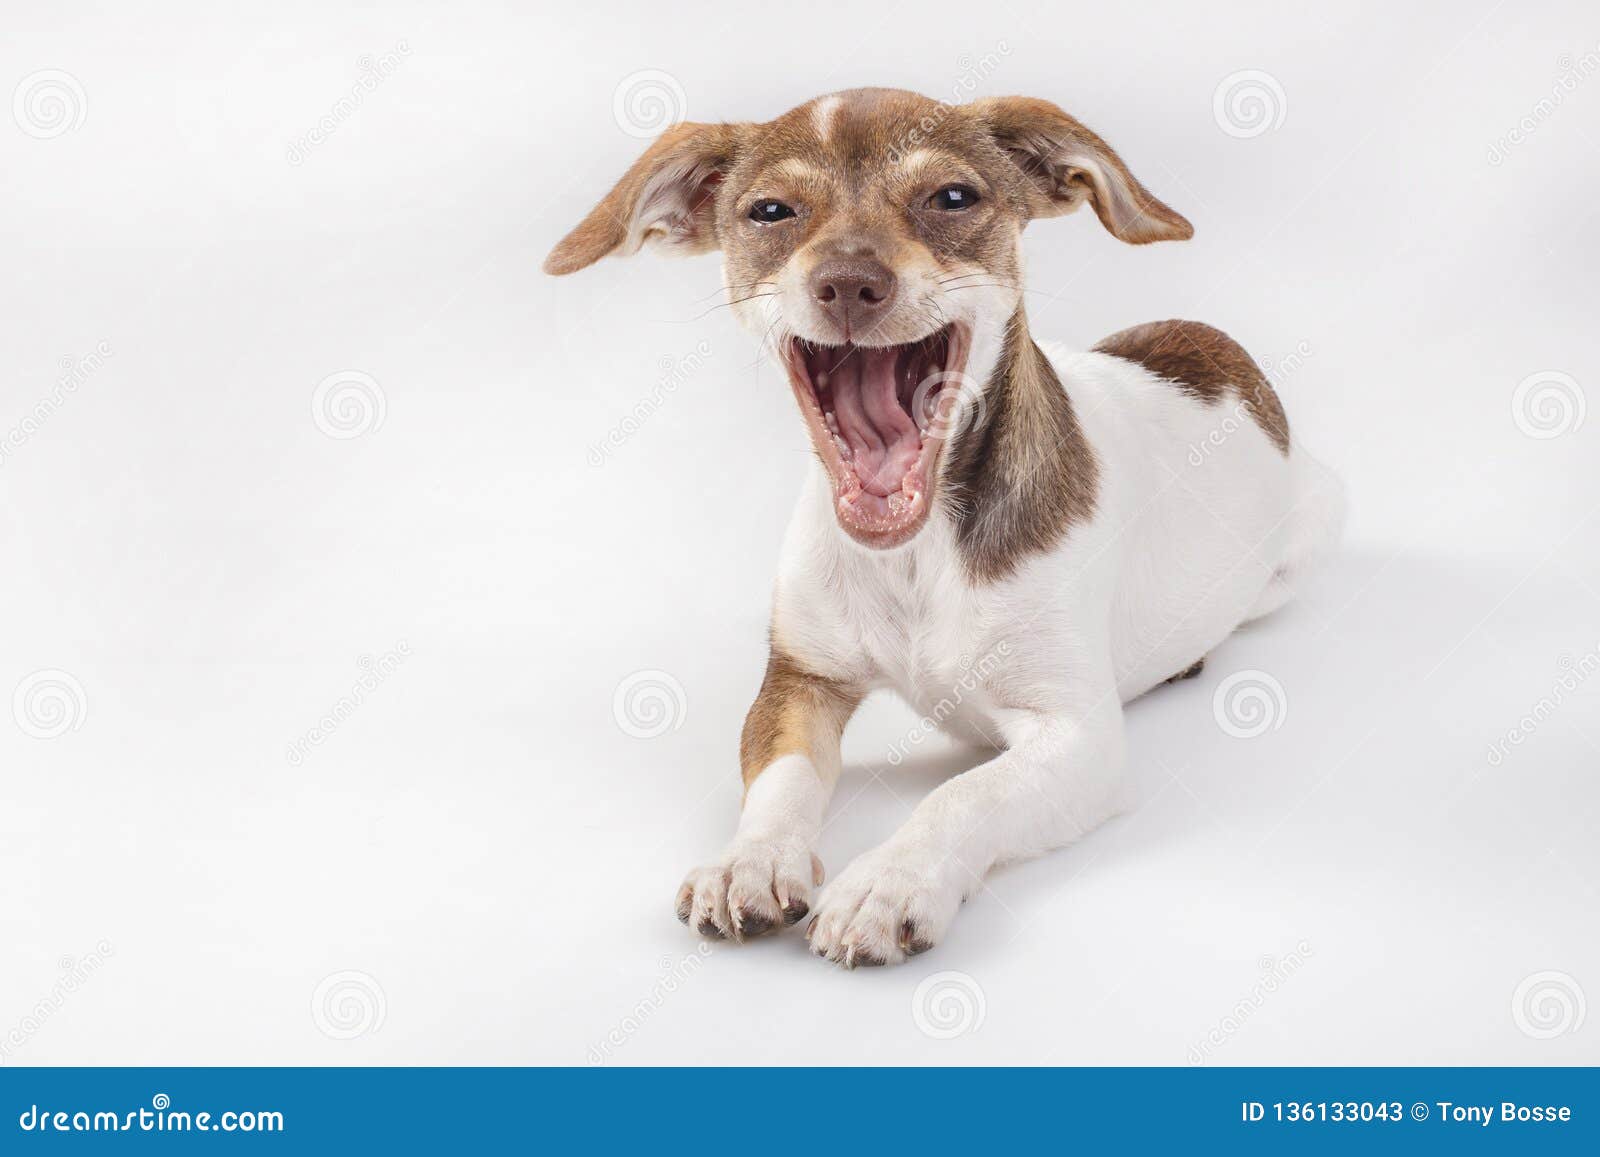 Small dog with a big smile stock image. Image of crossbreed - 136133043